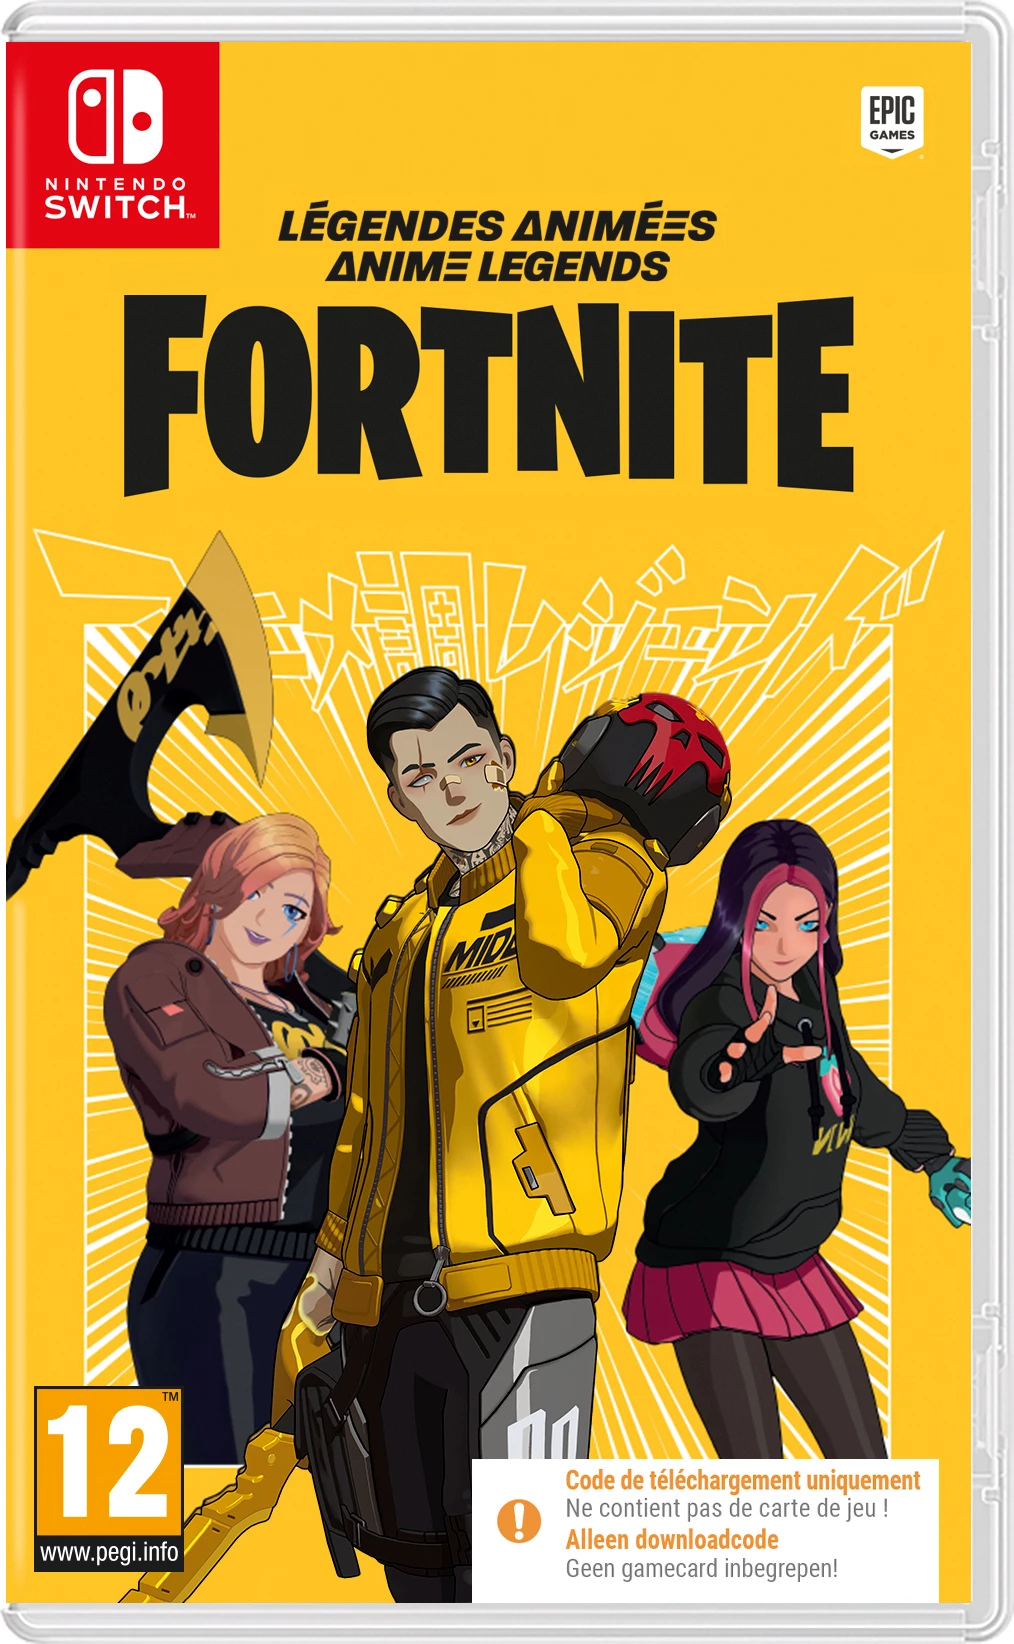 Fortnite: Anime Legends (Switch), Epic Games